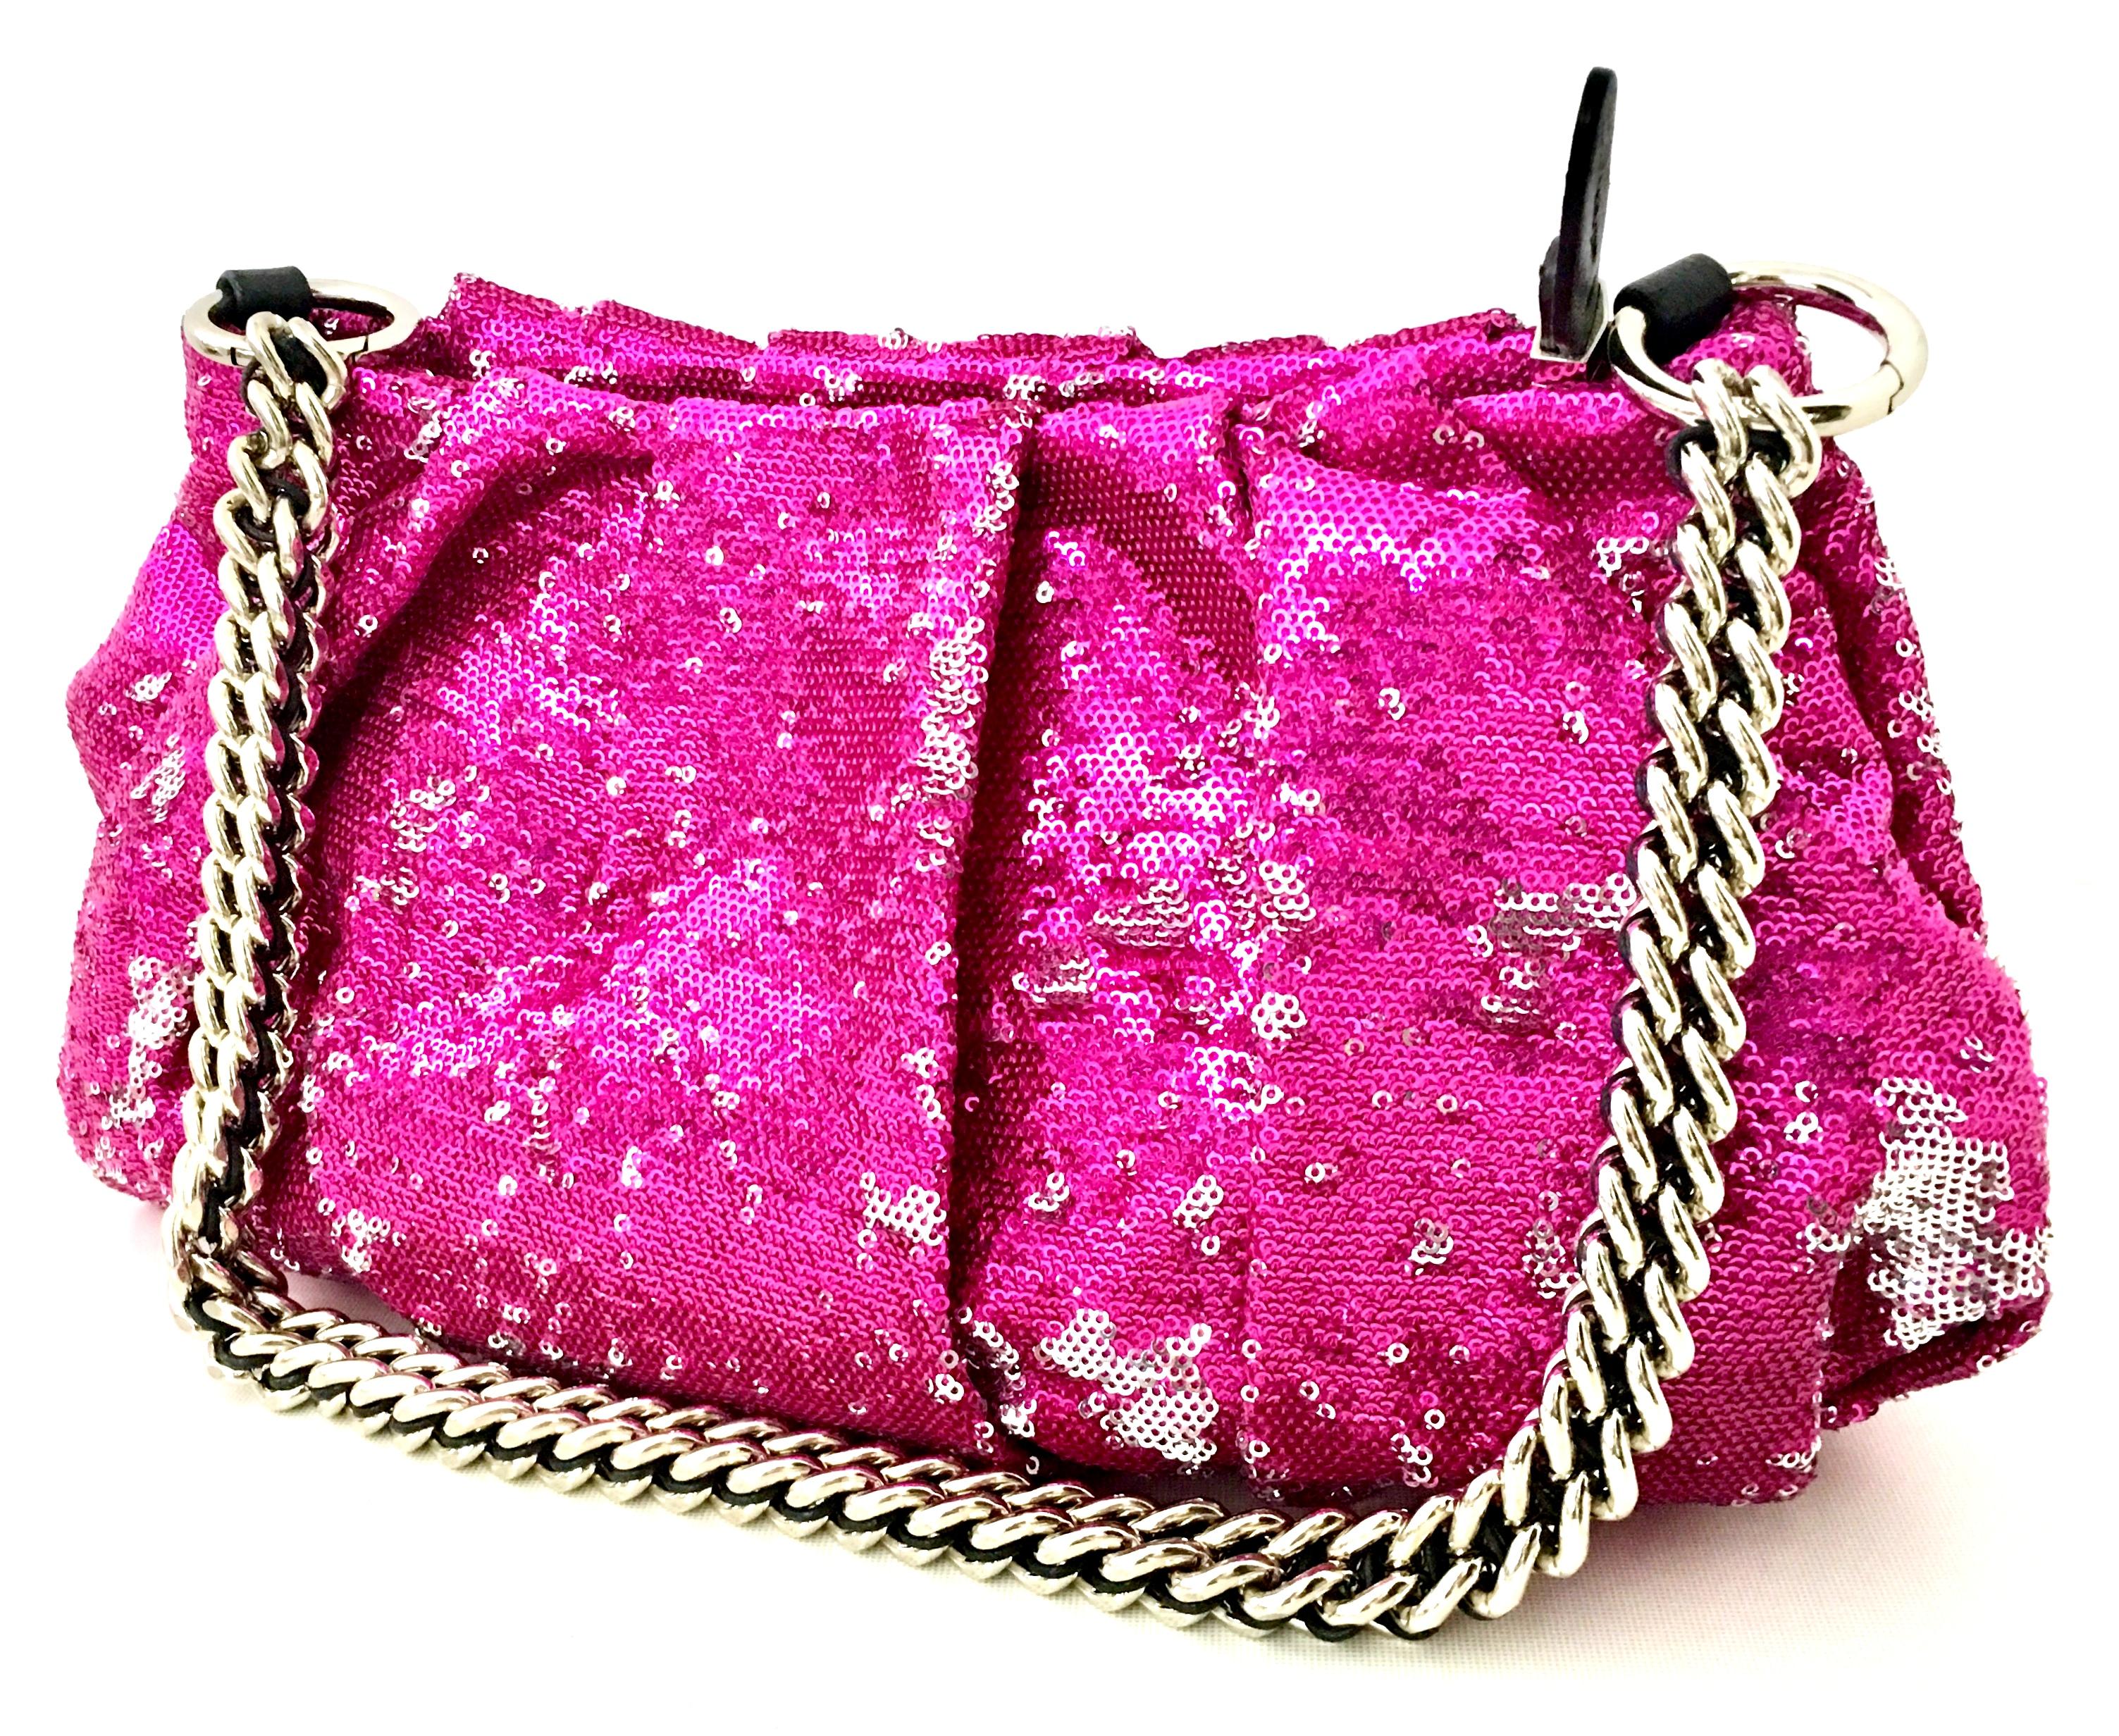 Pink 21st Century Contemporary Sequin, Leather & Chrome Hand Bag By, OrYanny